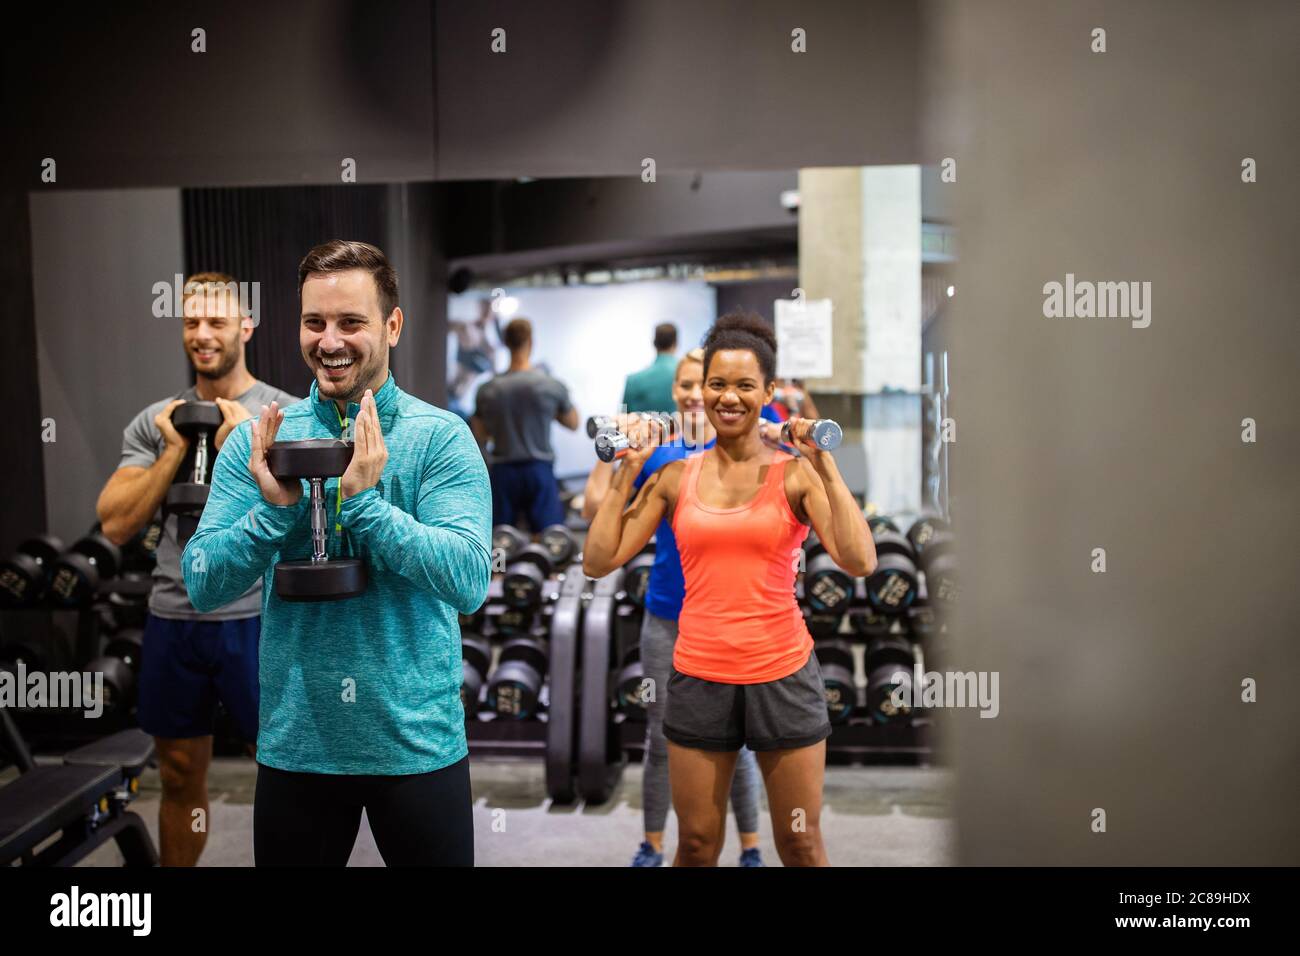 Fitness, sport, training, gym, success and lifestyle concept. Group of happy friends in the gym Stock Photo